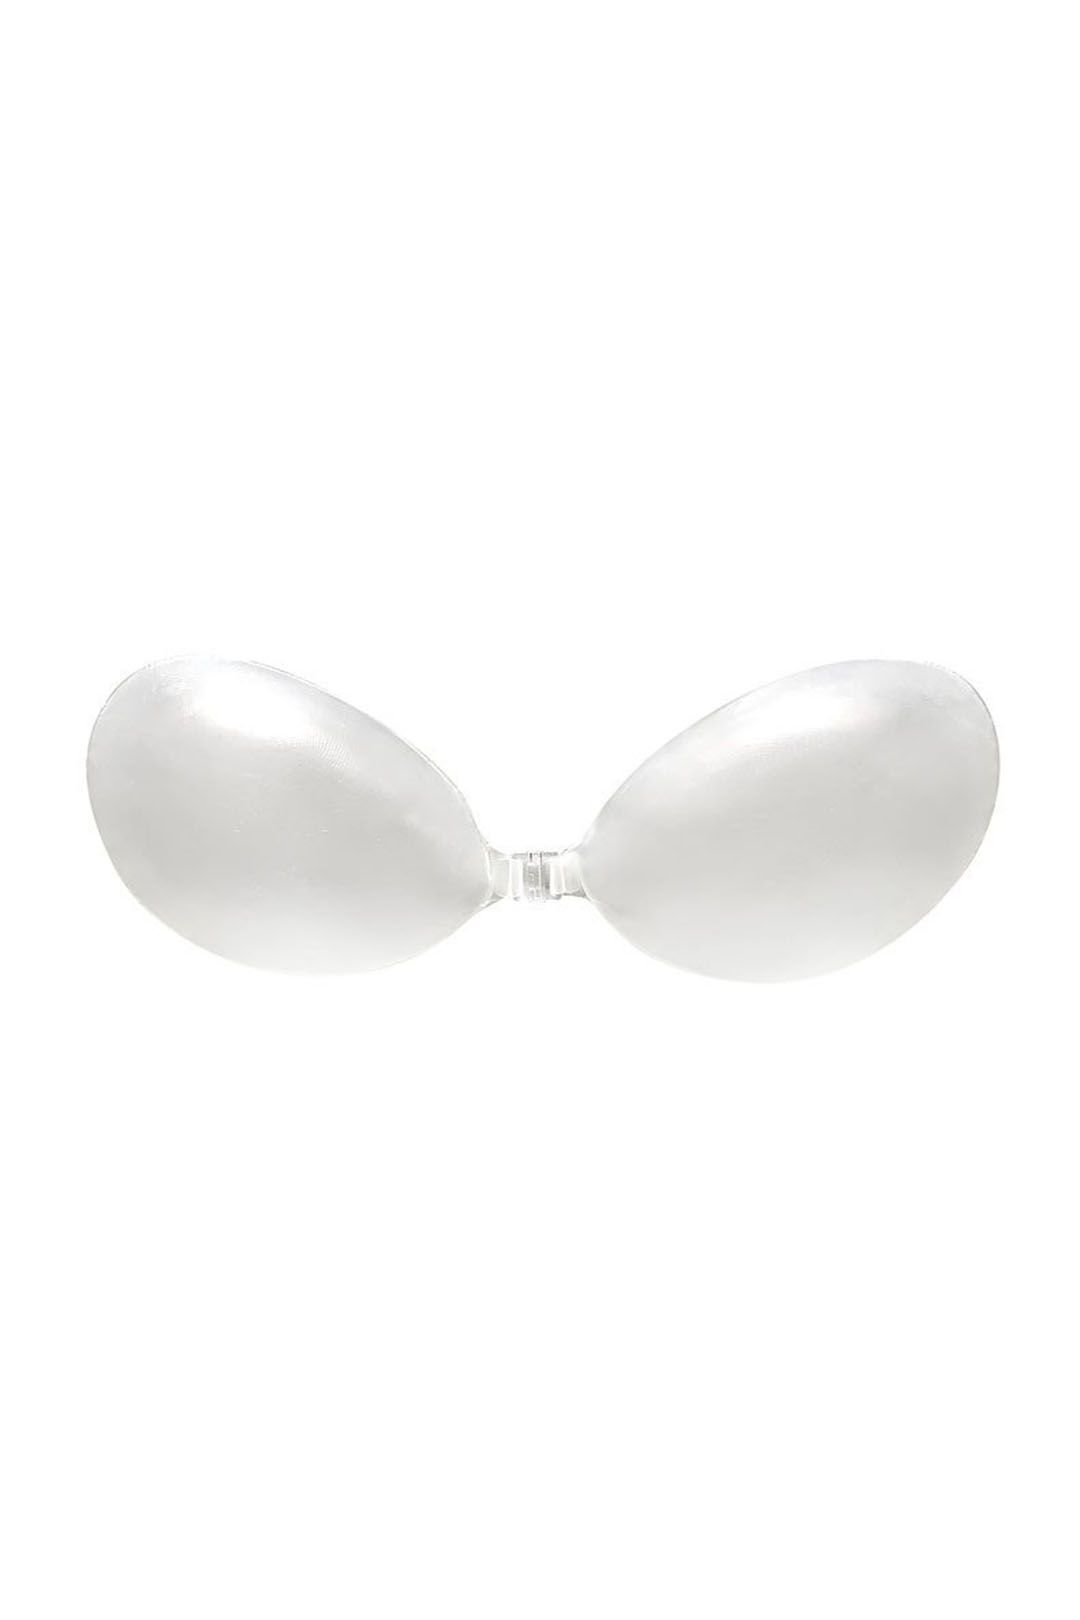 Secret Weapons - Nudi Boobies - Clear - Front Product